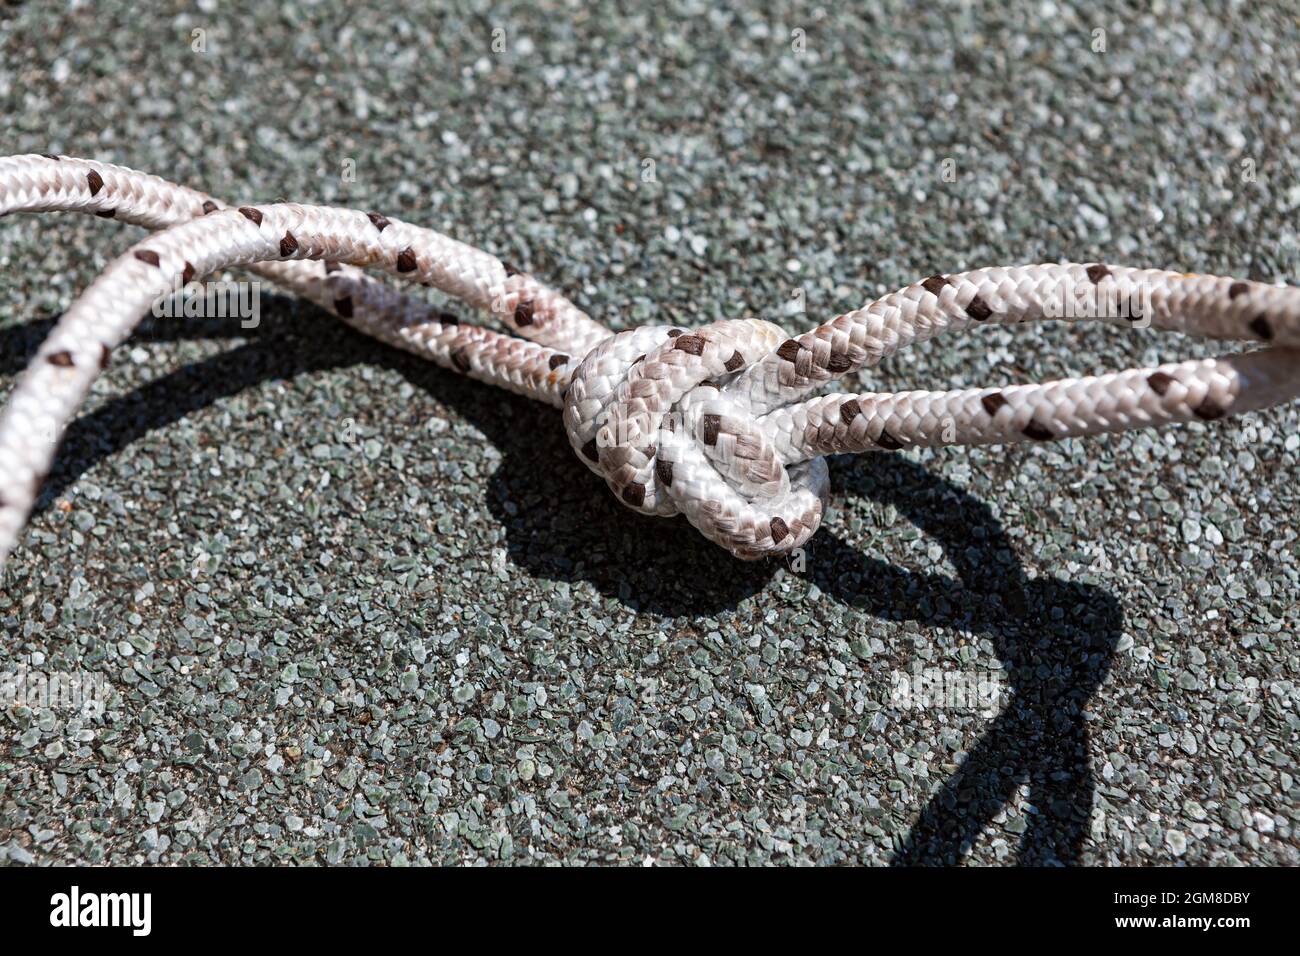 Knot on the Braided Polypropylene Marine Utility Cord . Details of Knot on  the rope Stock Photo - Alamy